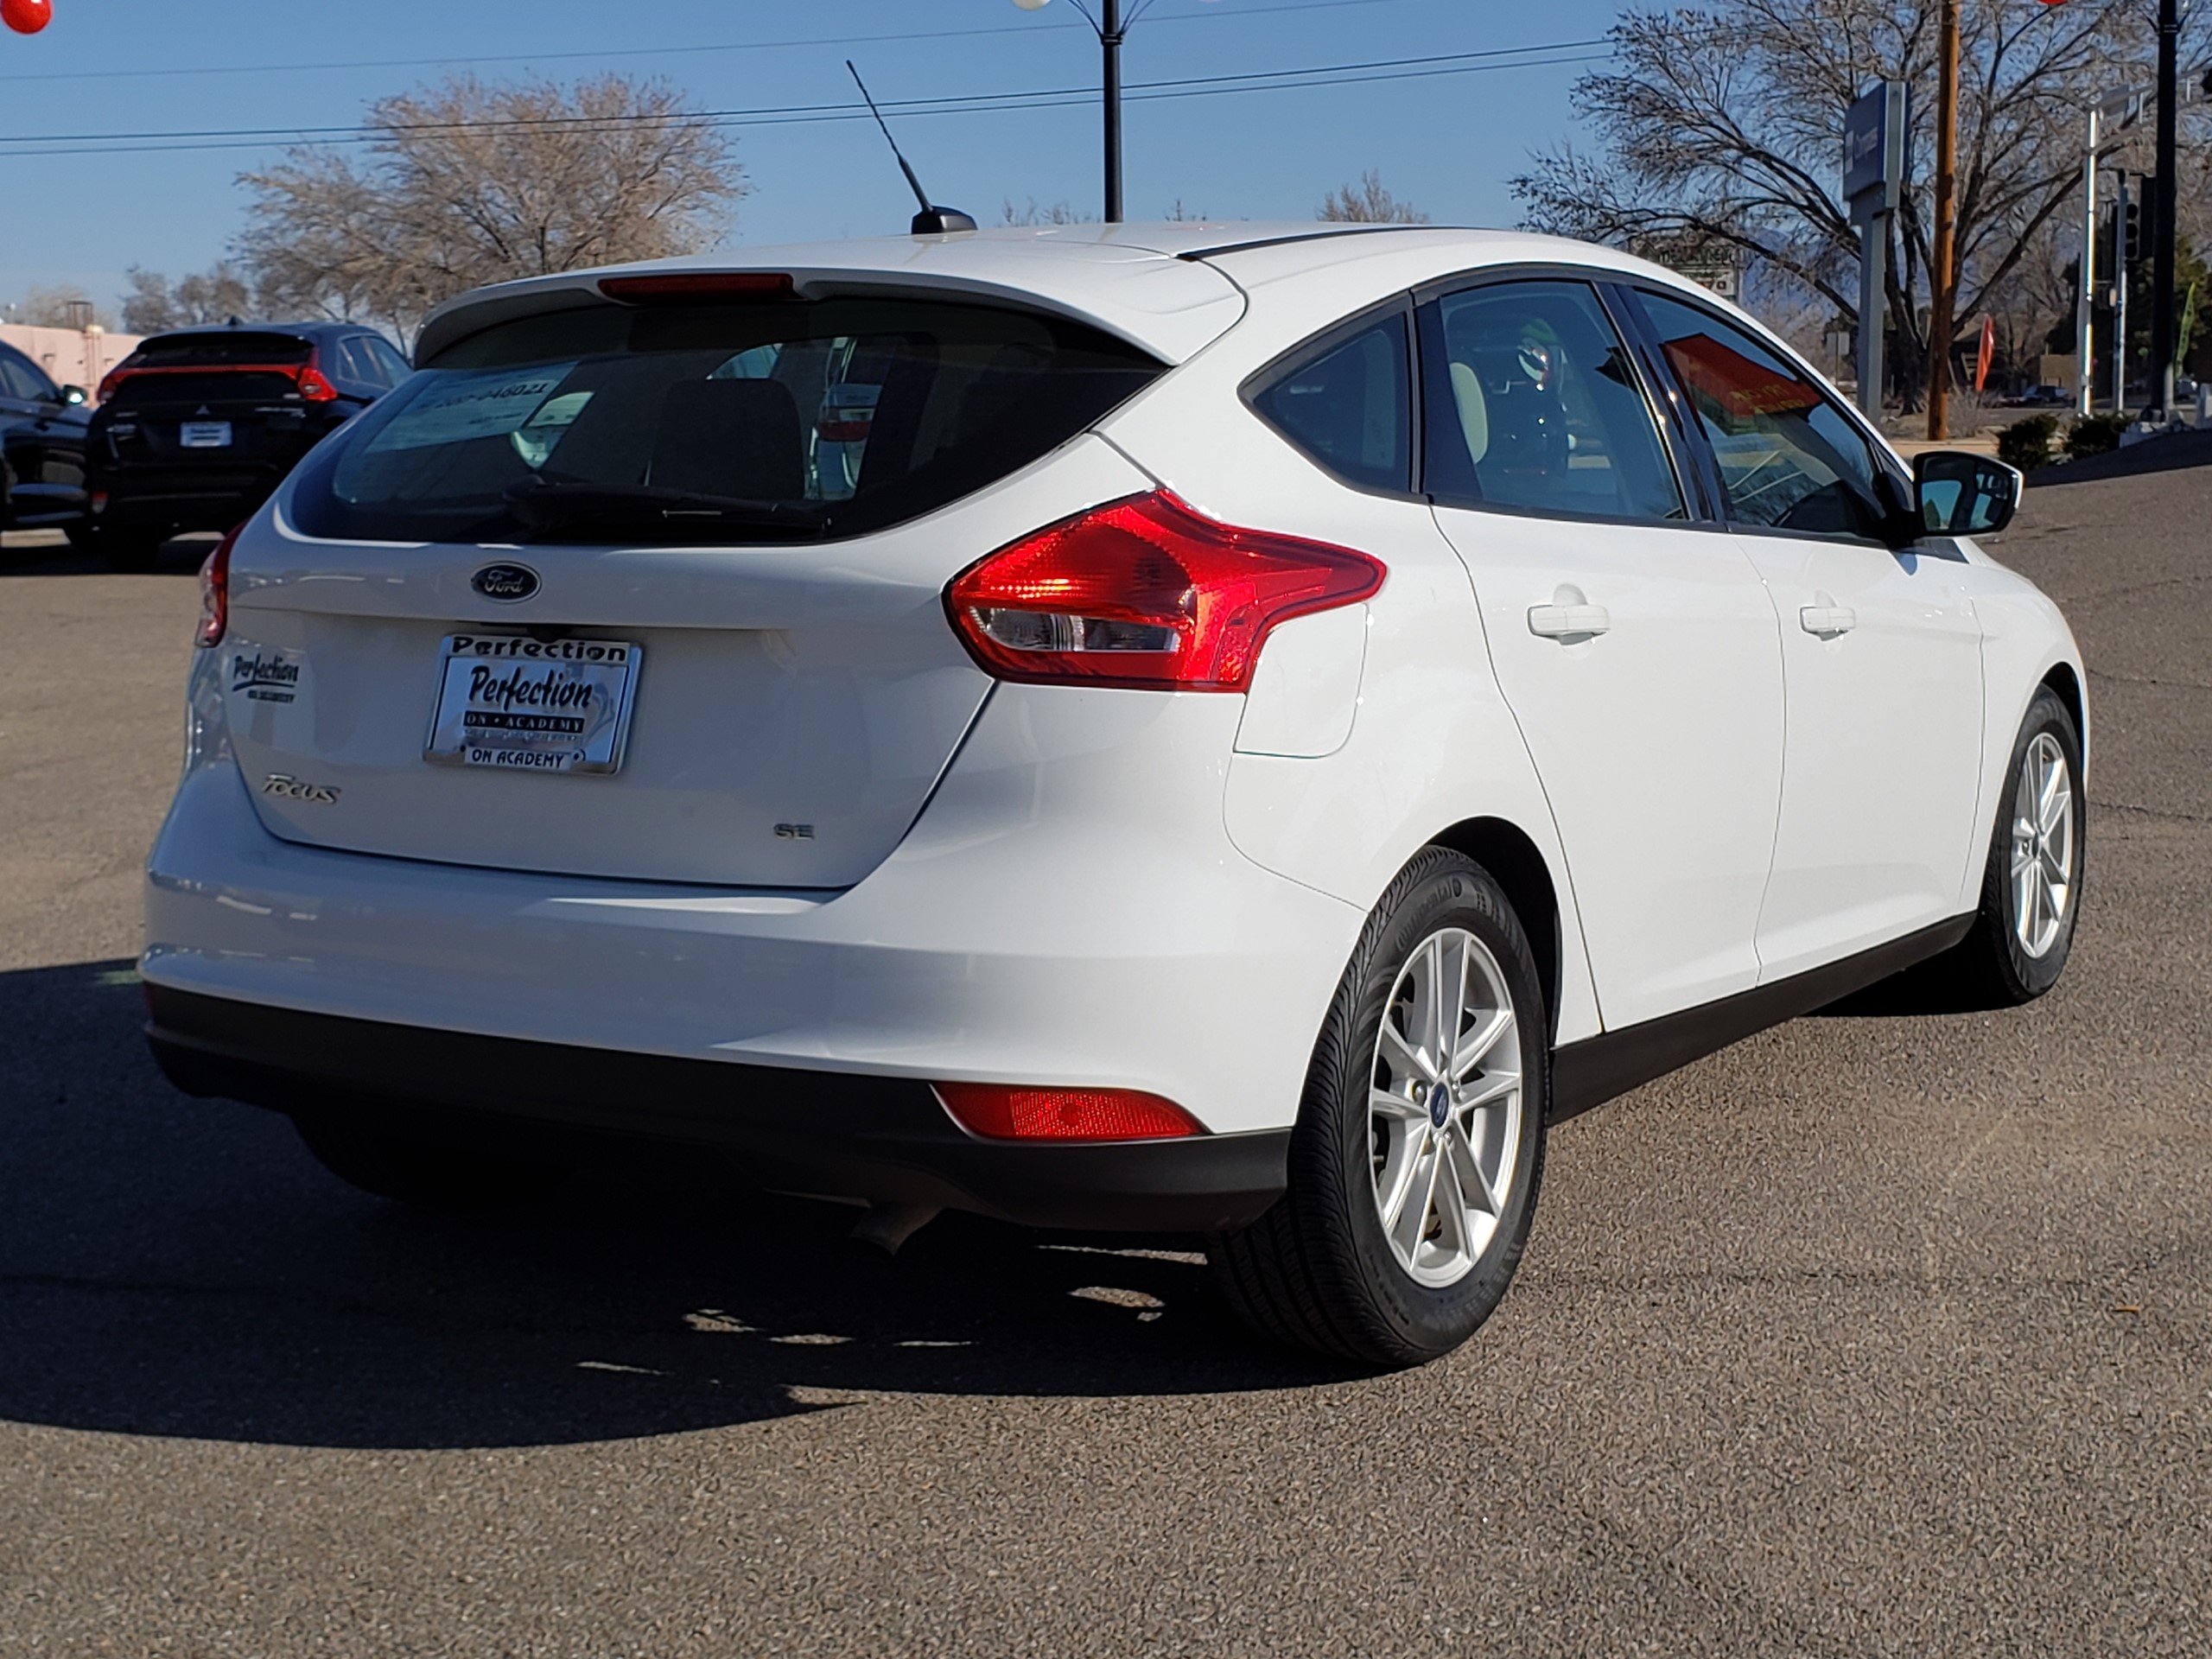 PreOwned 2018 Ford Focus SE Hatchback in Albuquerque 